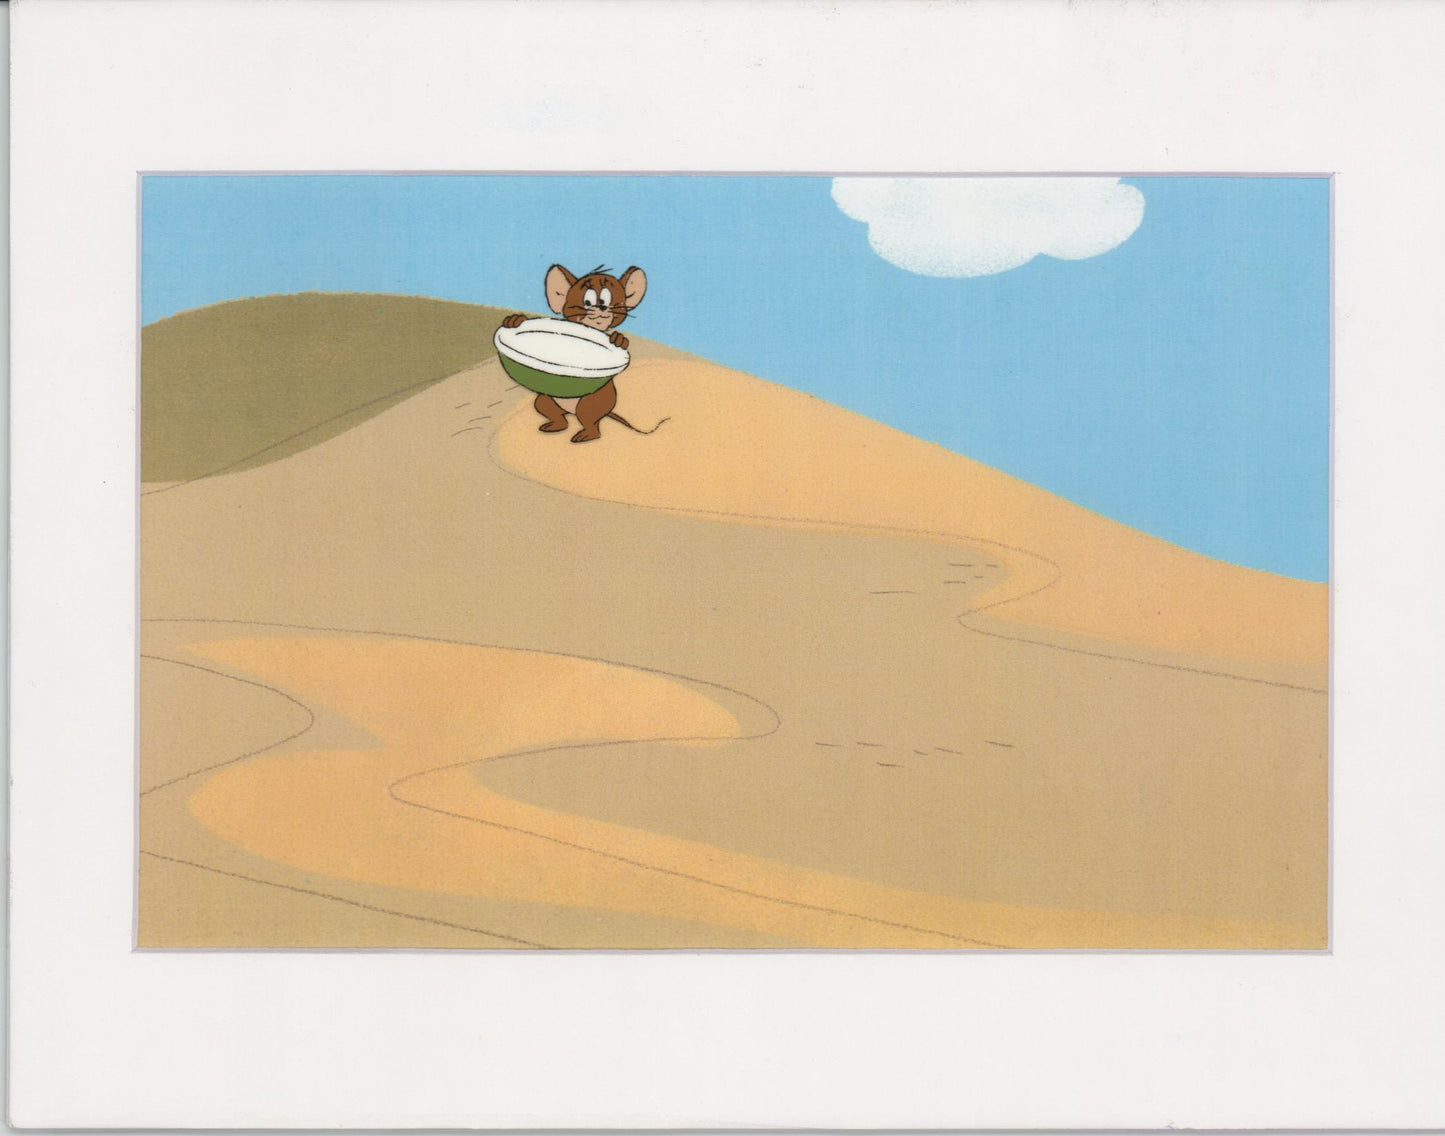 Tom & Jerry Original Production Animation Cel from Filmation 1980-82 b4446